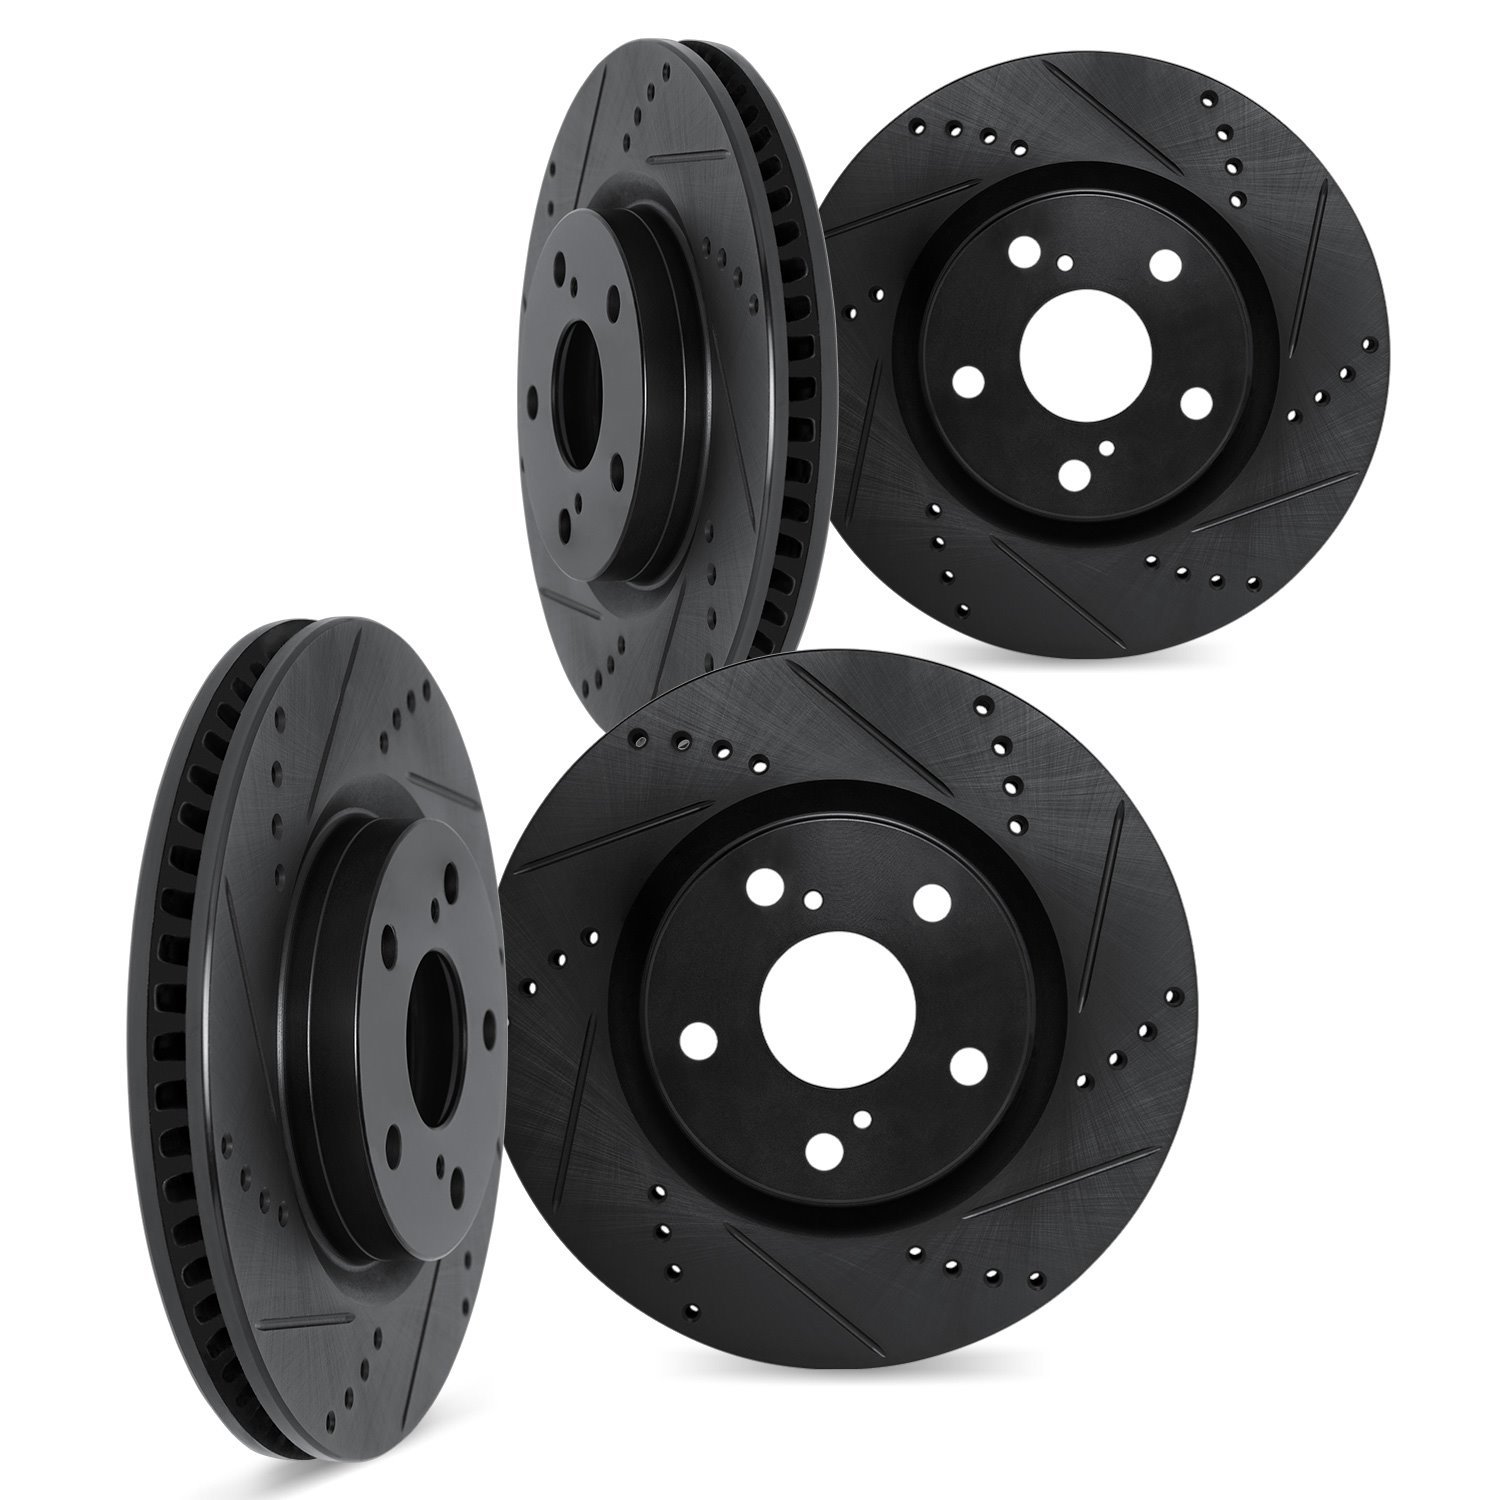 8004-39006 Drilled/Slotted Brake Rotors [Black], Fits Select Mopar, Position: Front and Rear